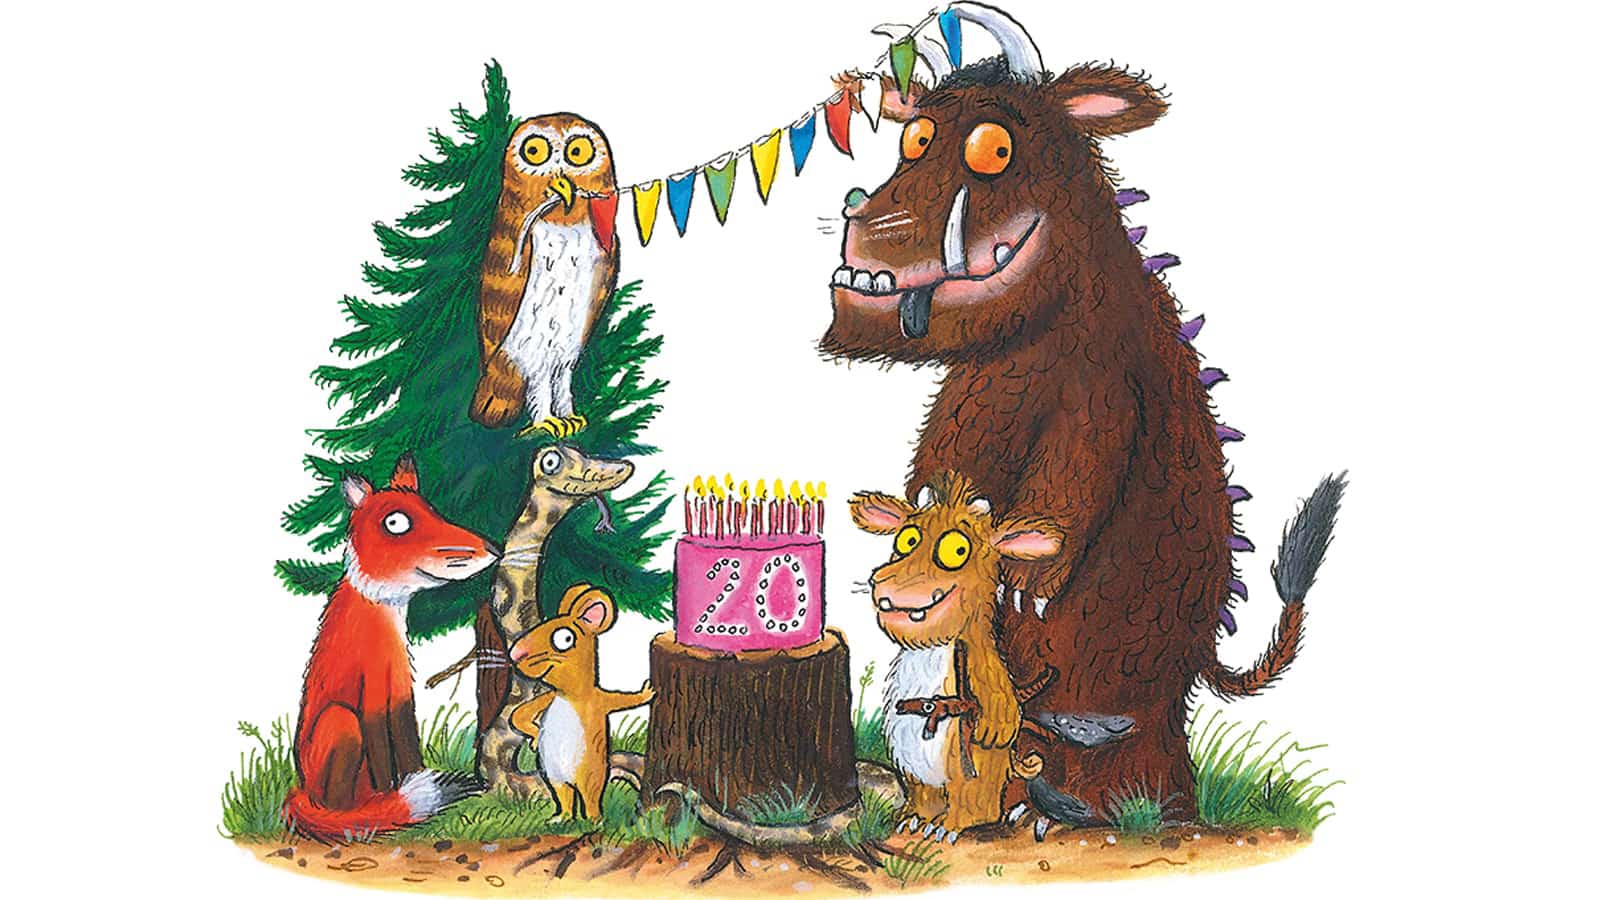 The Gruffalo, The Gruffalo's Child, the mouse, fox, snake and owl in the woods, standing smiling around a birthday cake with bunting above them